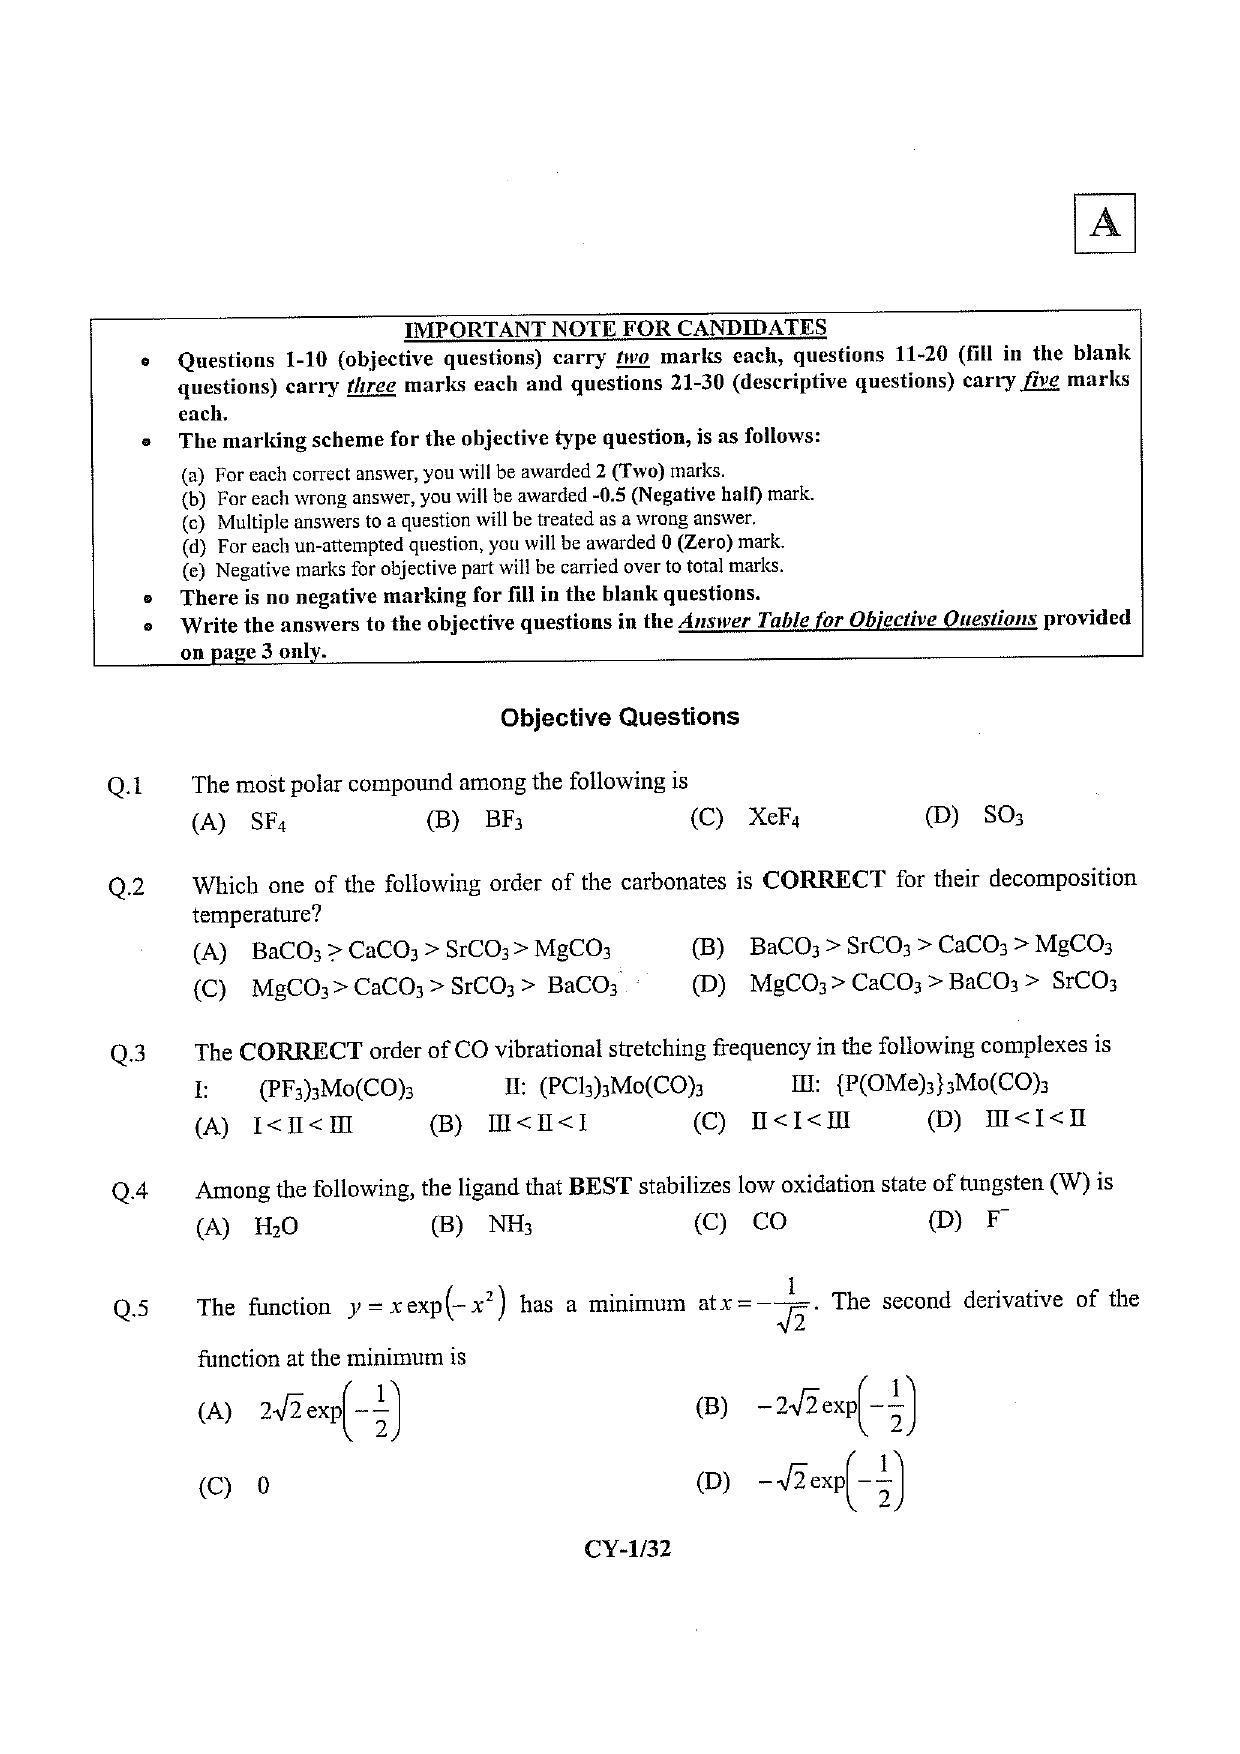 JAM 2013: CY Question Paper - Page 2